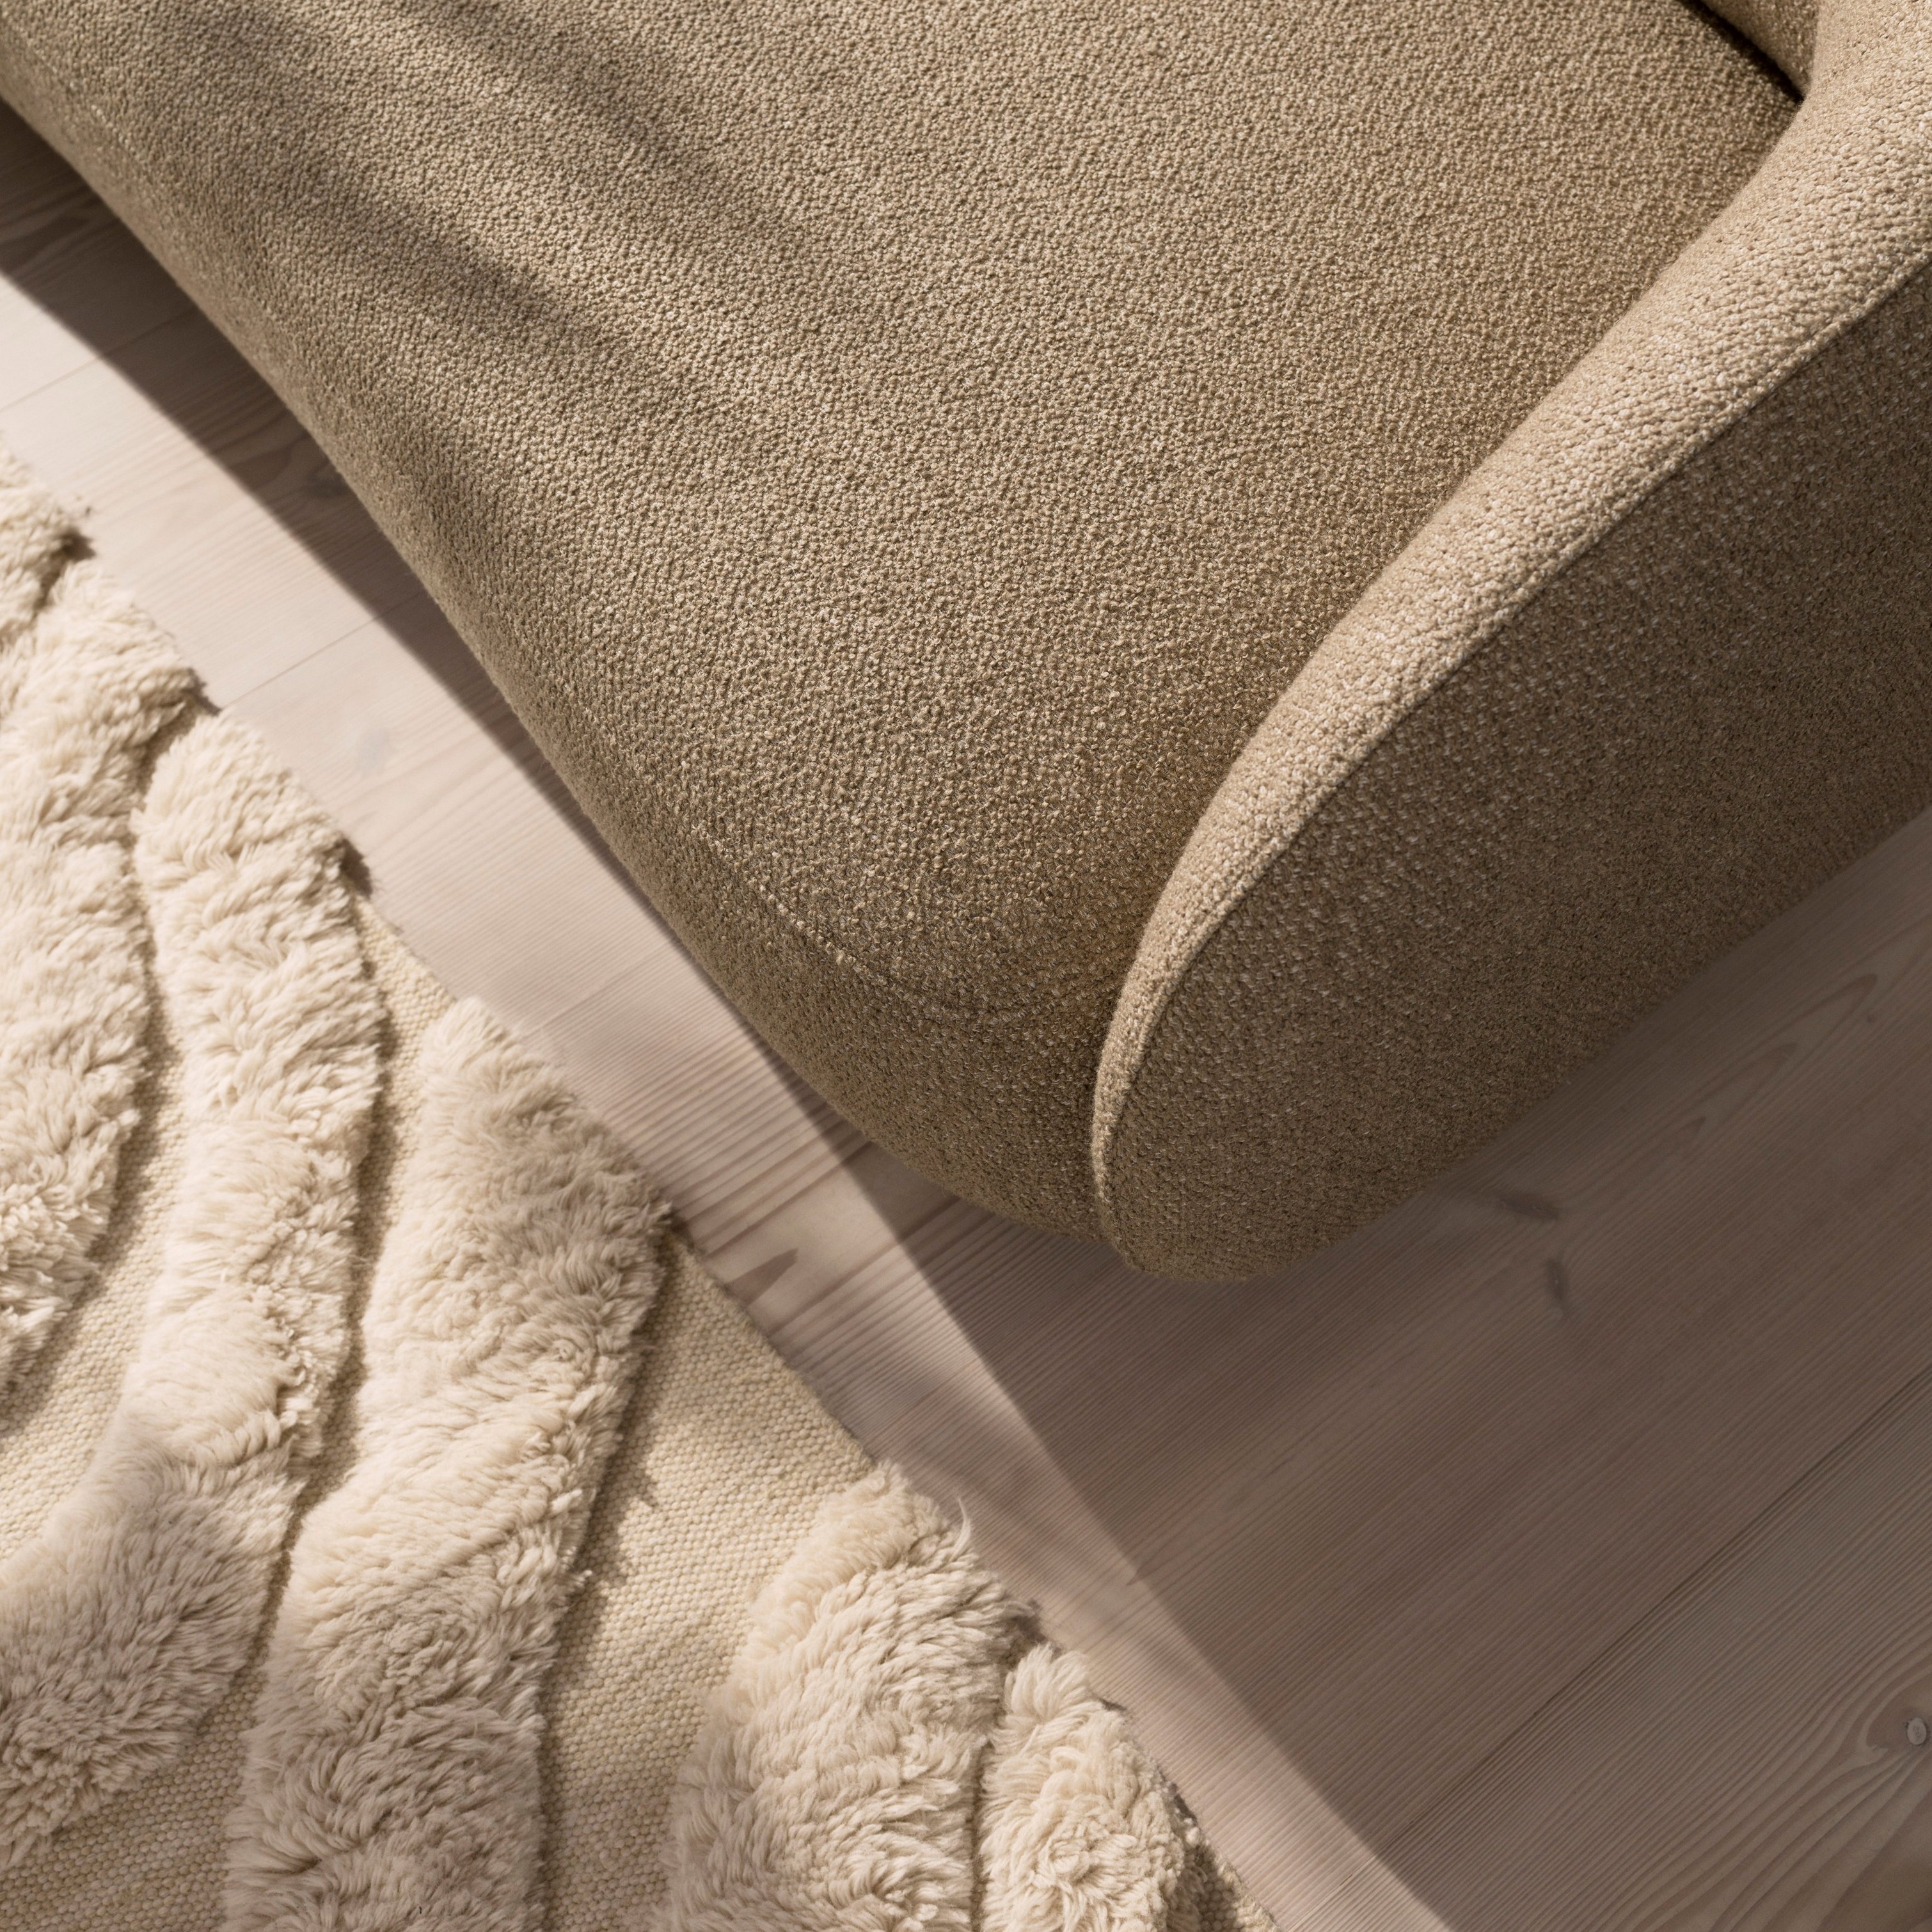 Close up of the Bolzano sofa in brown Lazio fabric and the Form rug in beige.